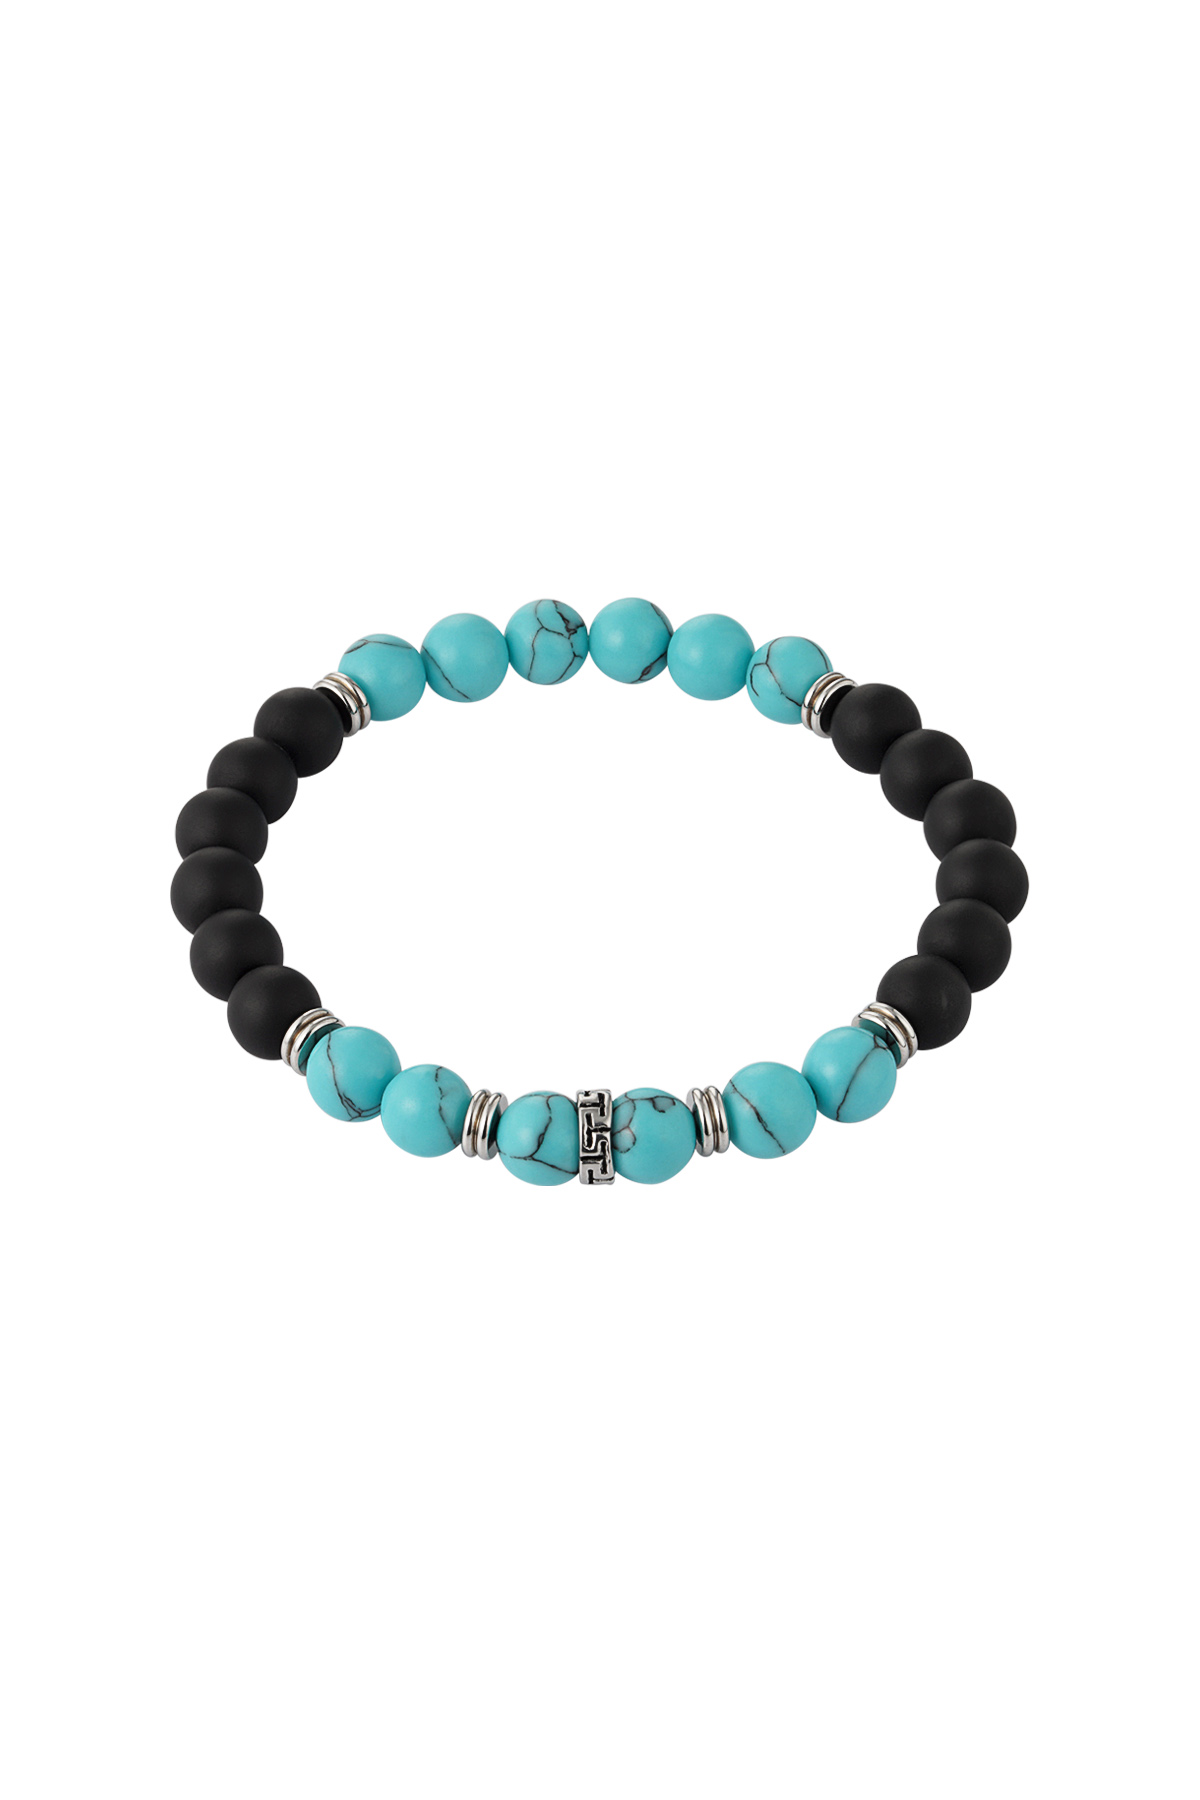 Men's bracelet with different beads - turquoise/black 